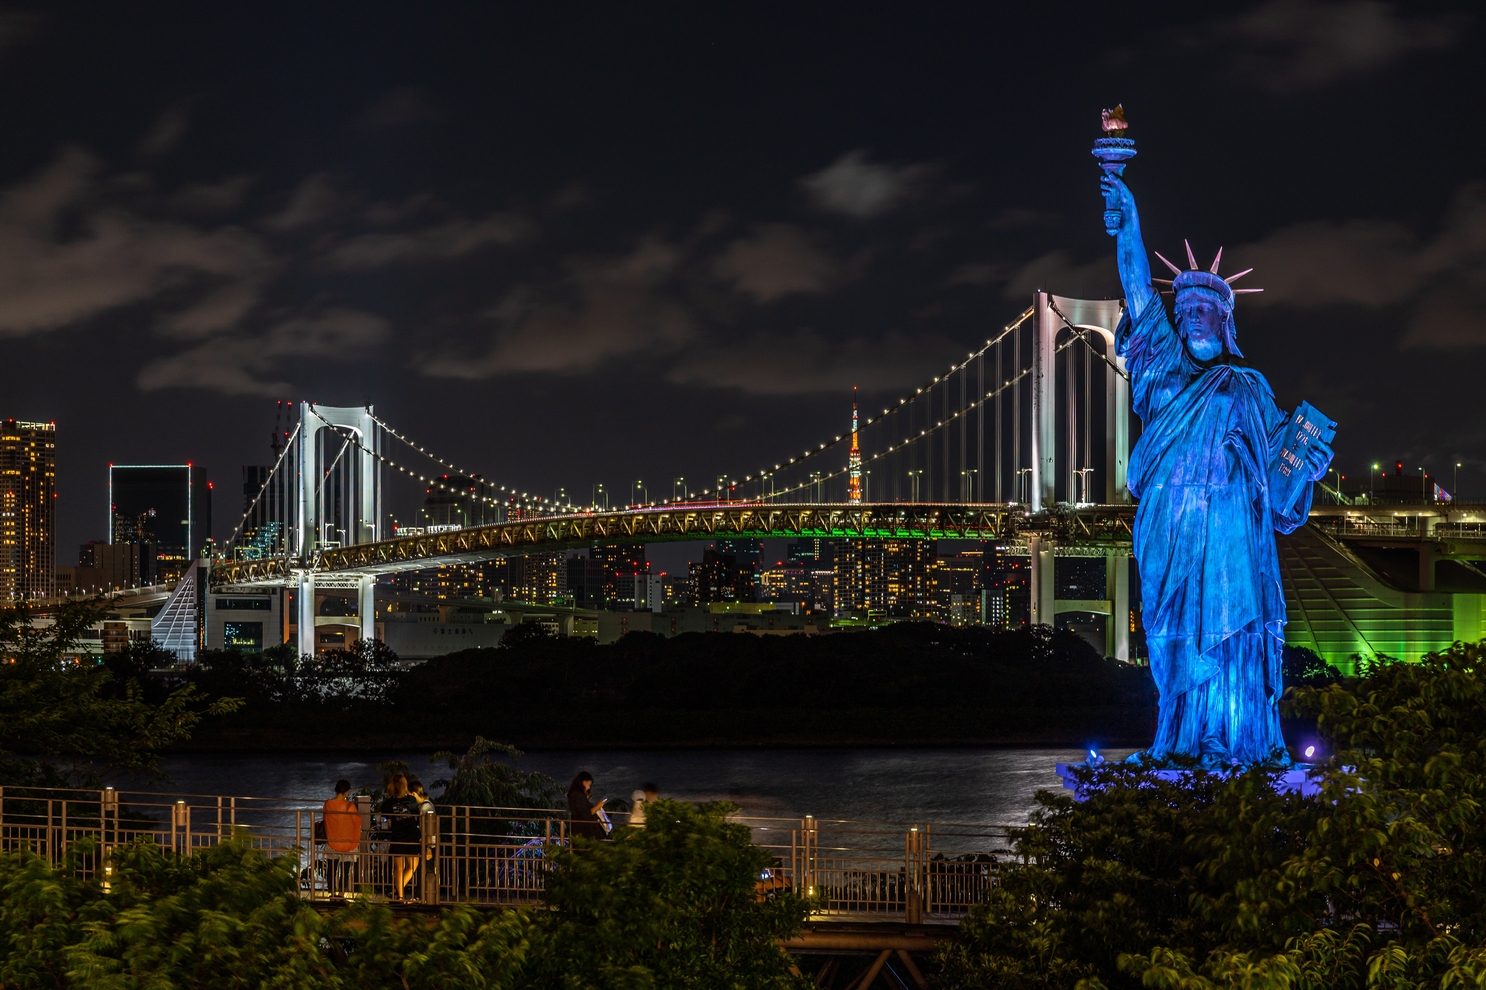 Odaiba Statue of Liberty Replica surrounded by lights with the Rainbow Bridge on the background